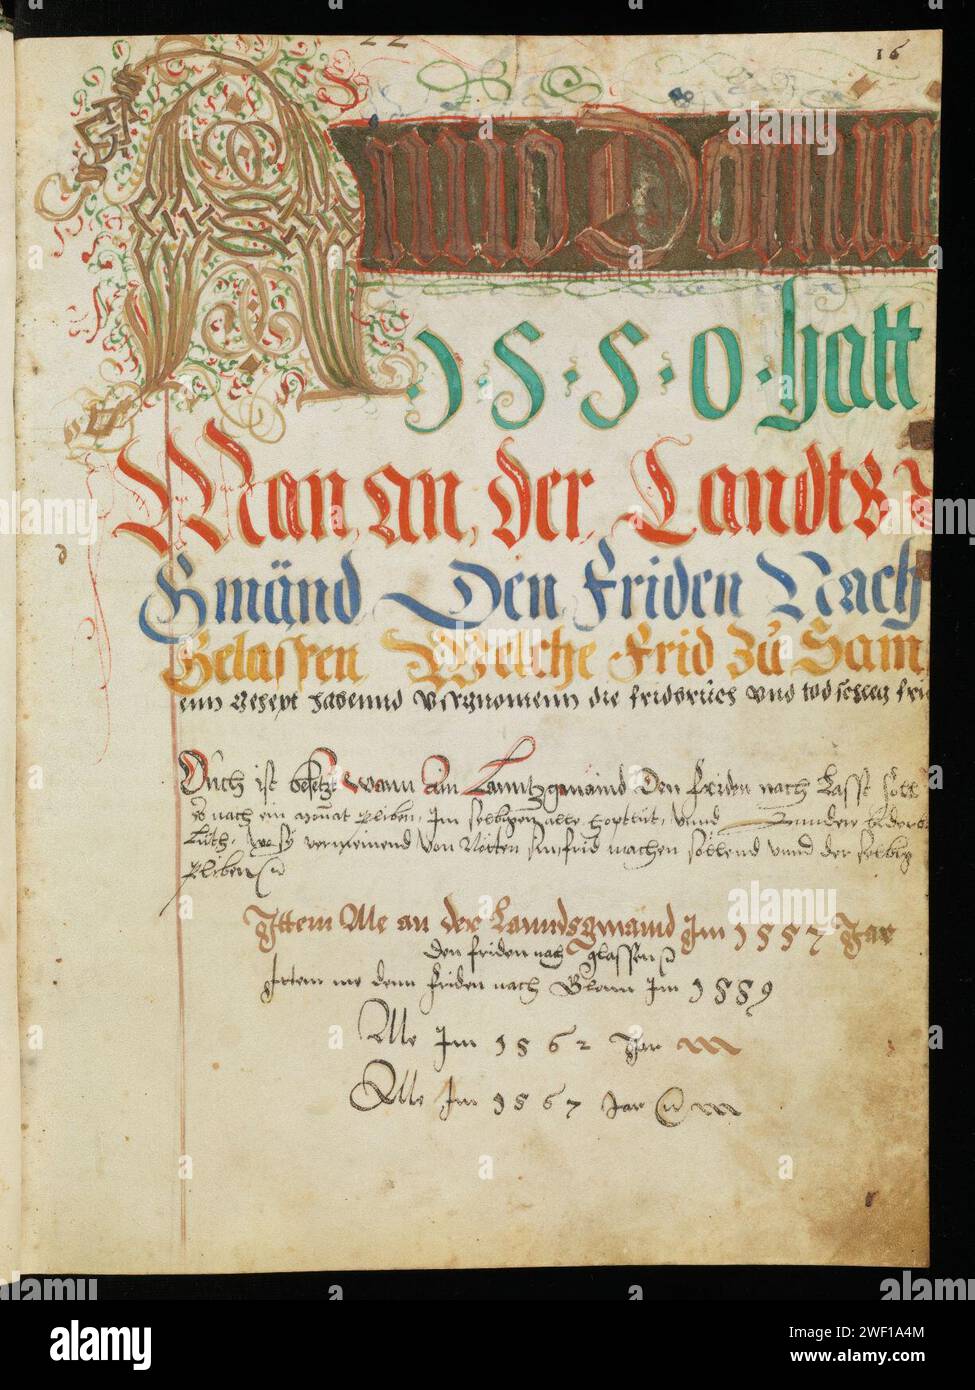 Appenzell, Landesarchiv Appenzell Innerrhoden, E.10.02.01.01, f. 16r – Silver Book of the Land. Stock Photo